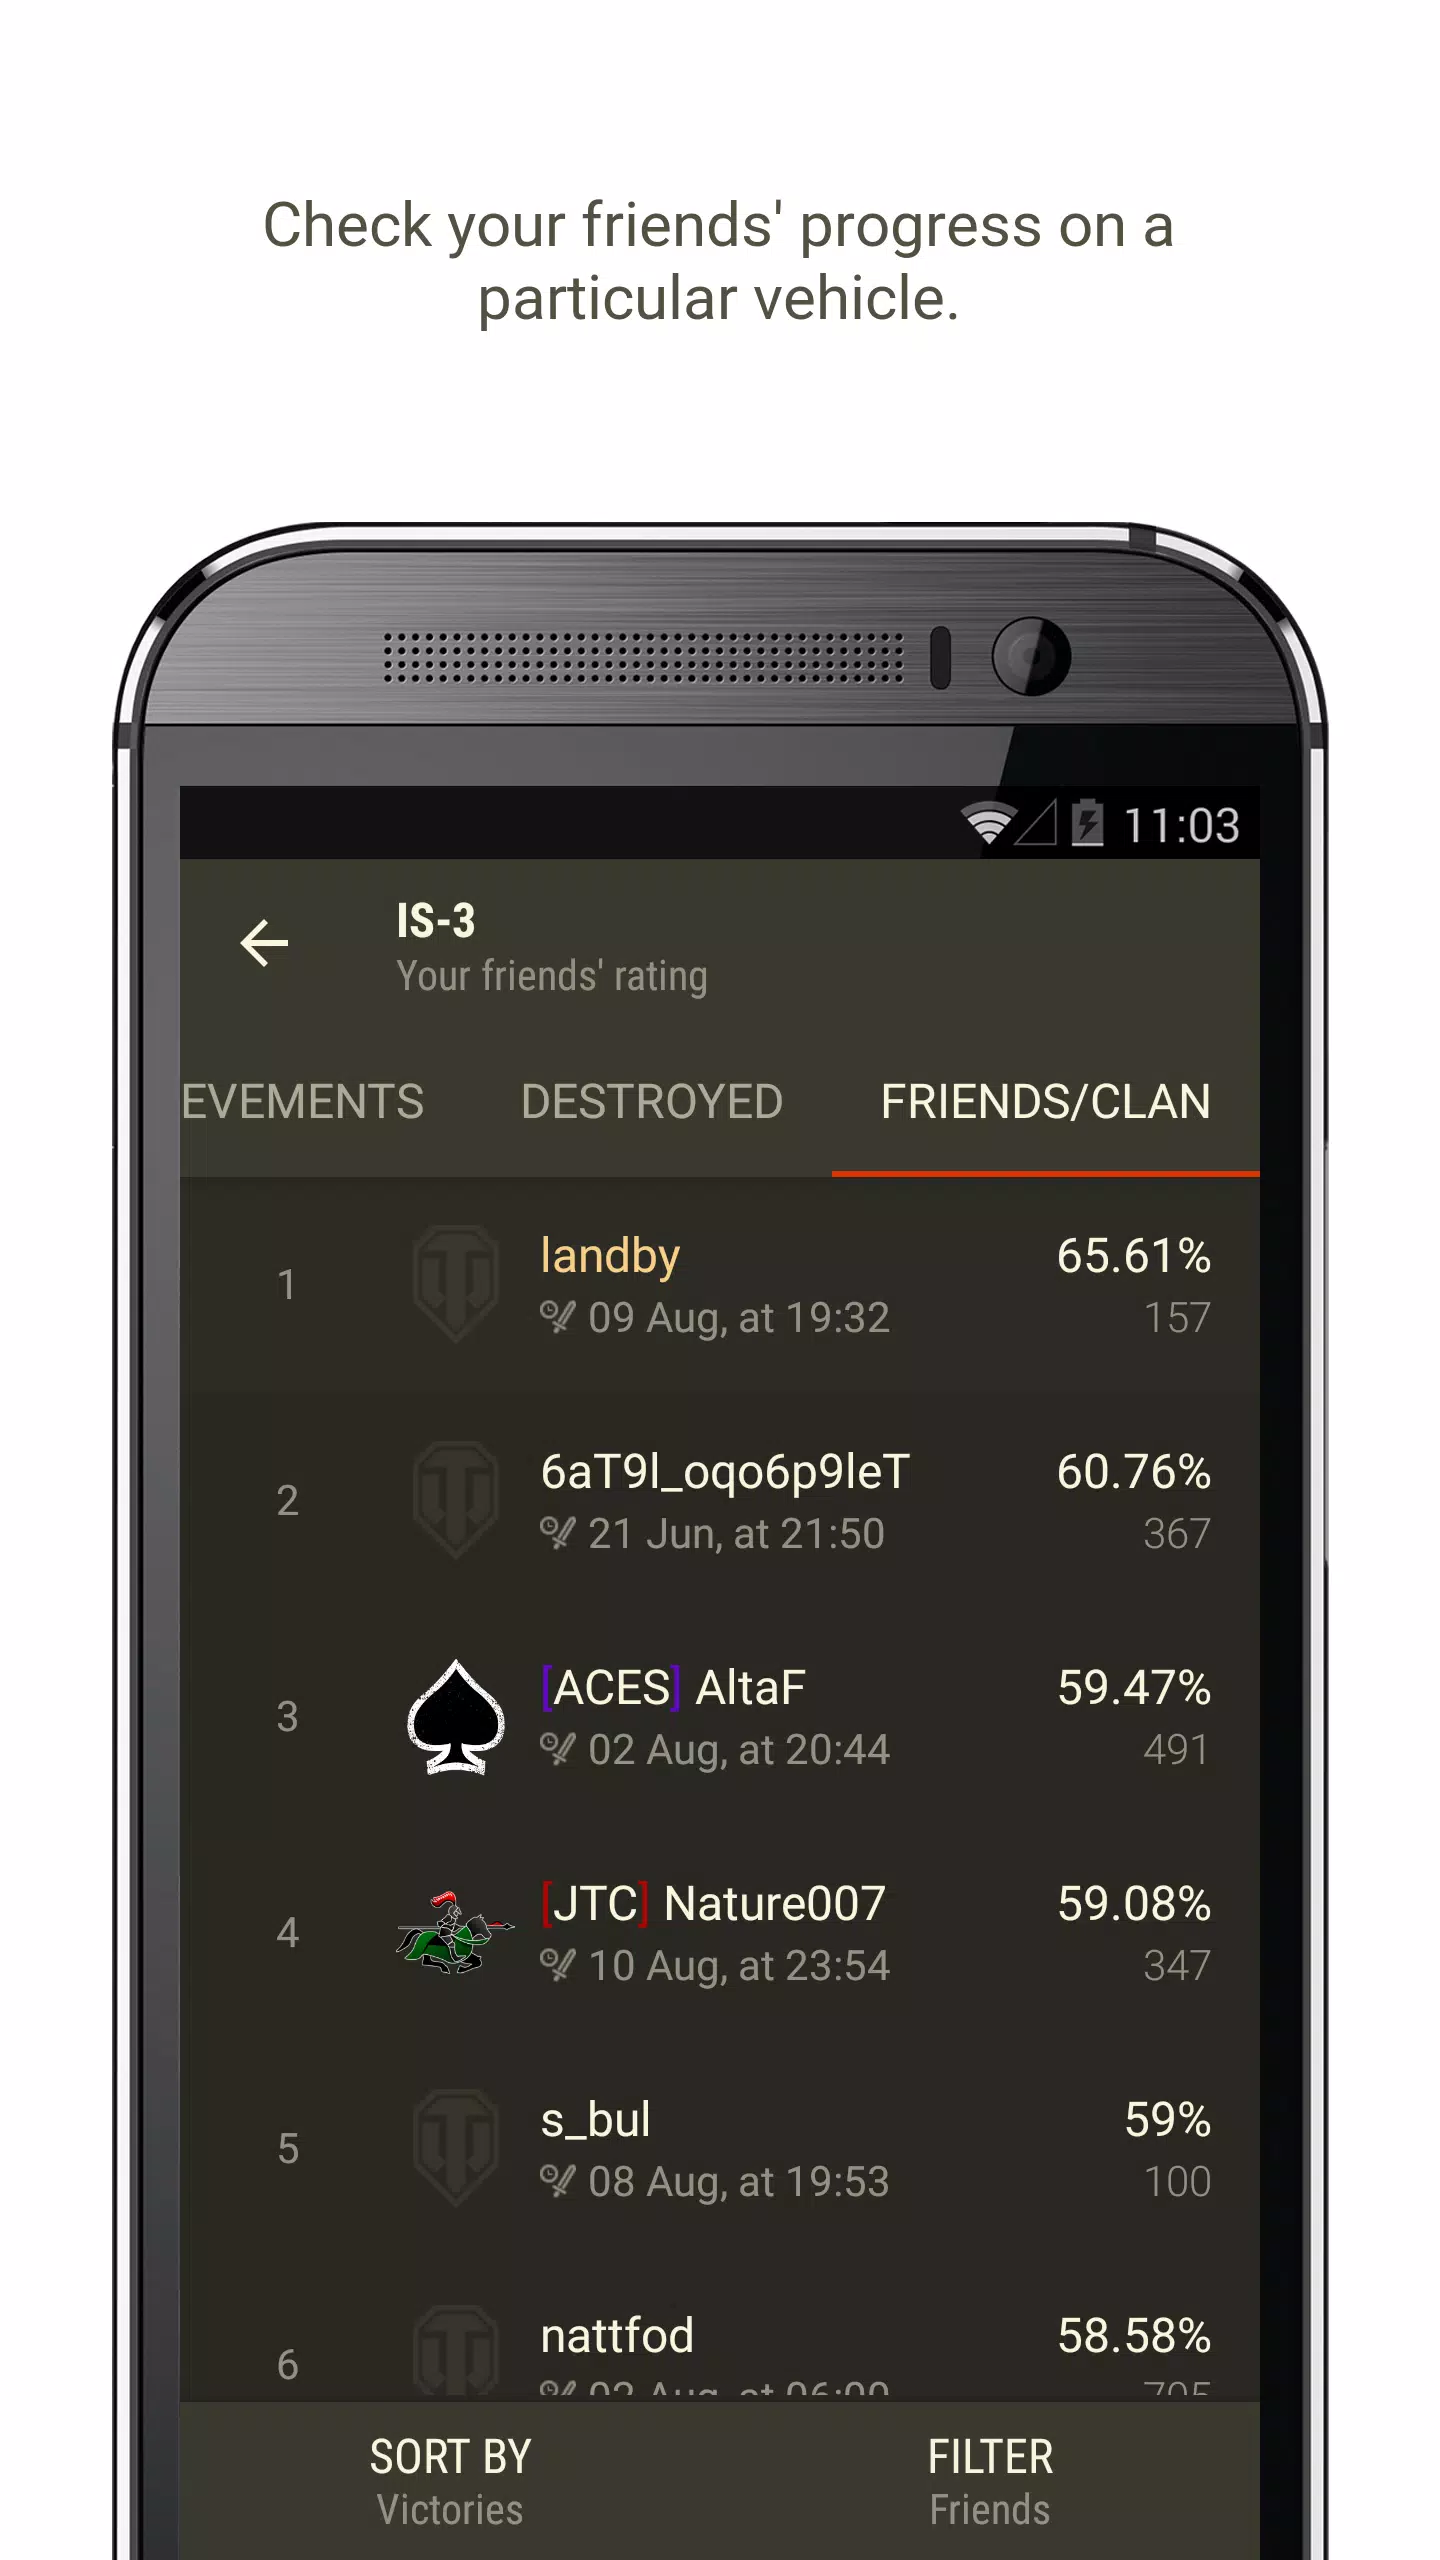 Battlefield BF4 Stats for Android - Download the APK from Uptodown